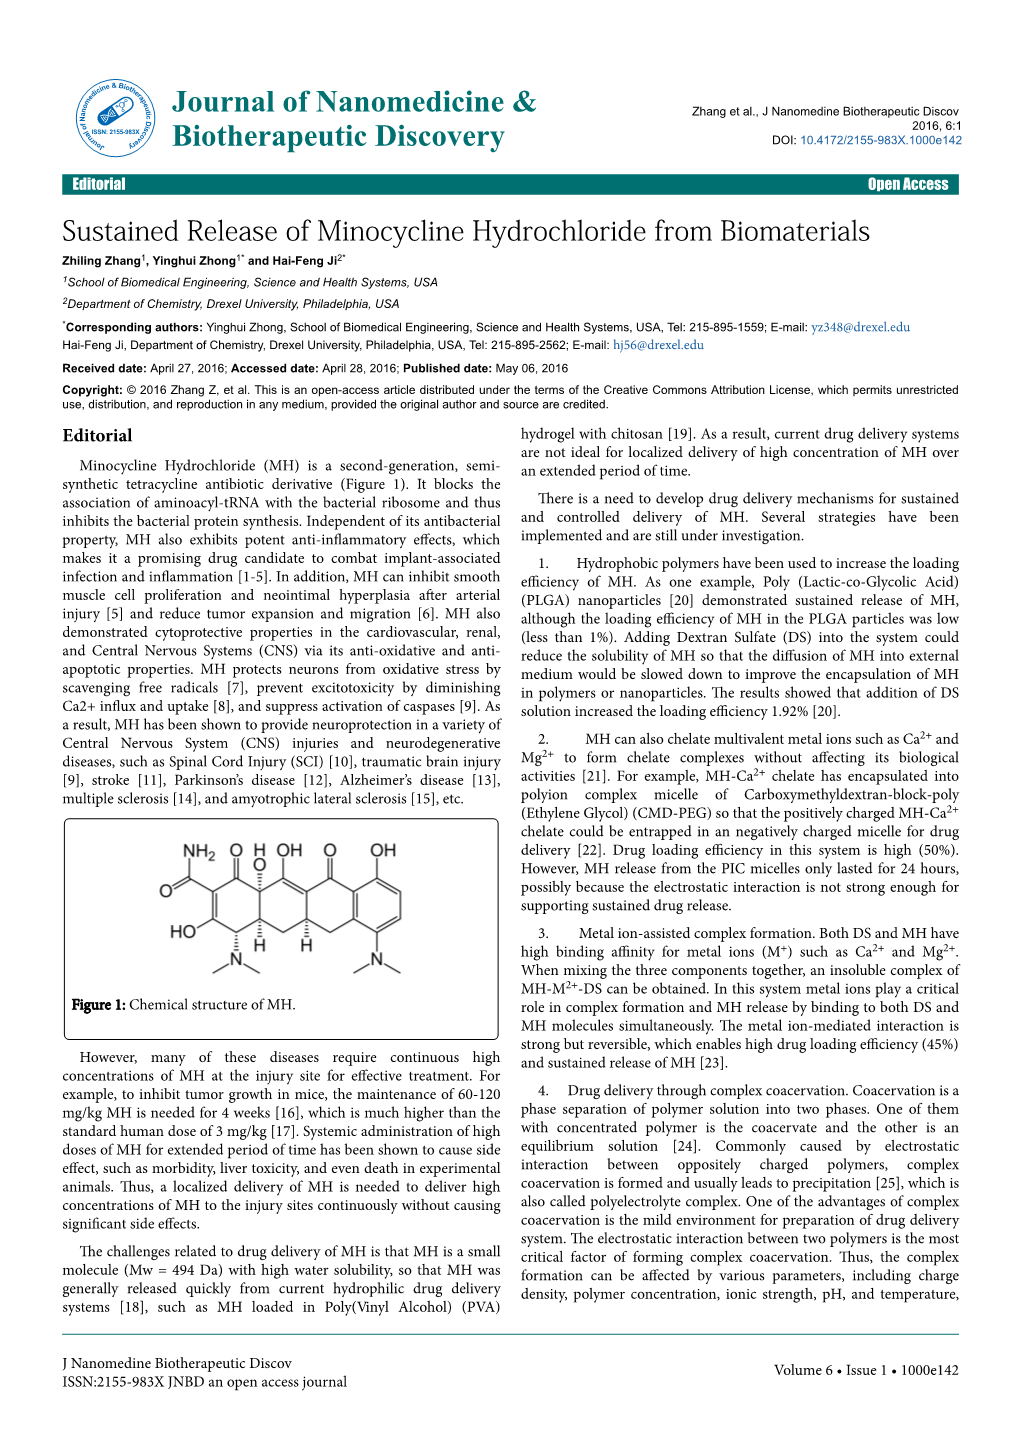 Sustained Release of Minocycline Hydrochloride from Biomaterials